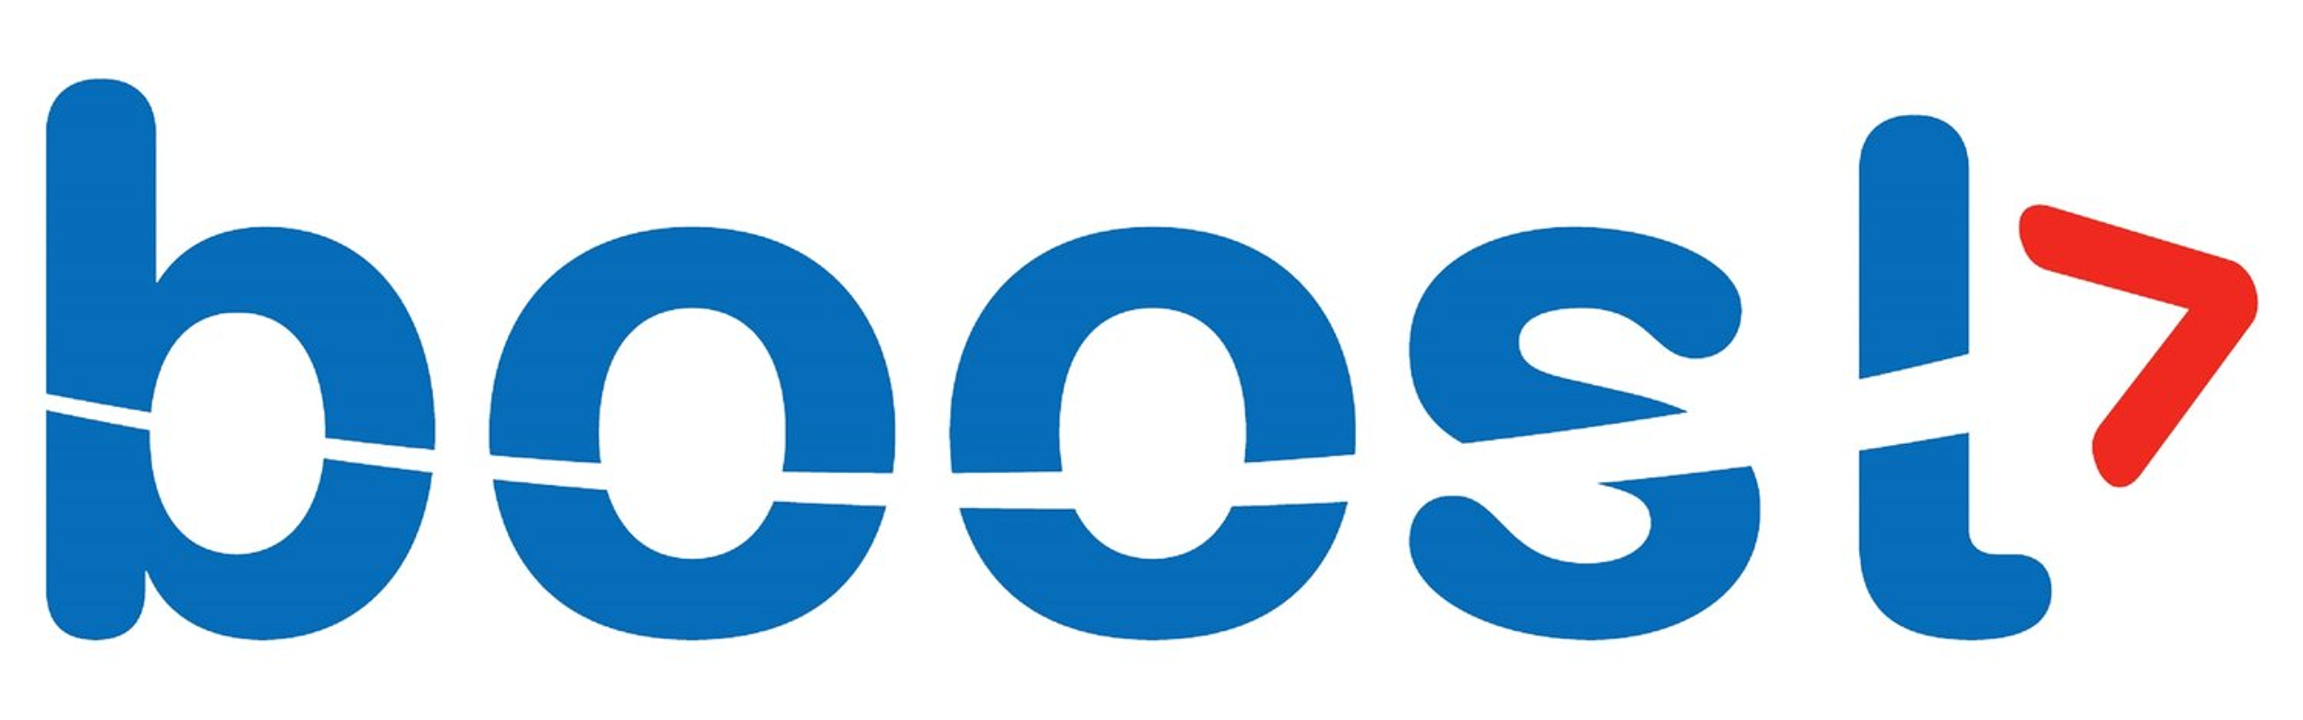 Boost logo: boost written in blue with a red arrow at the end of the word